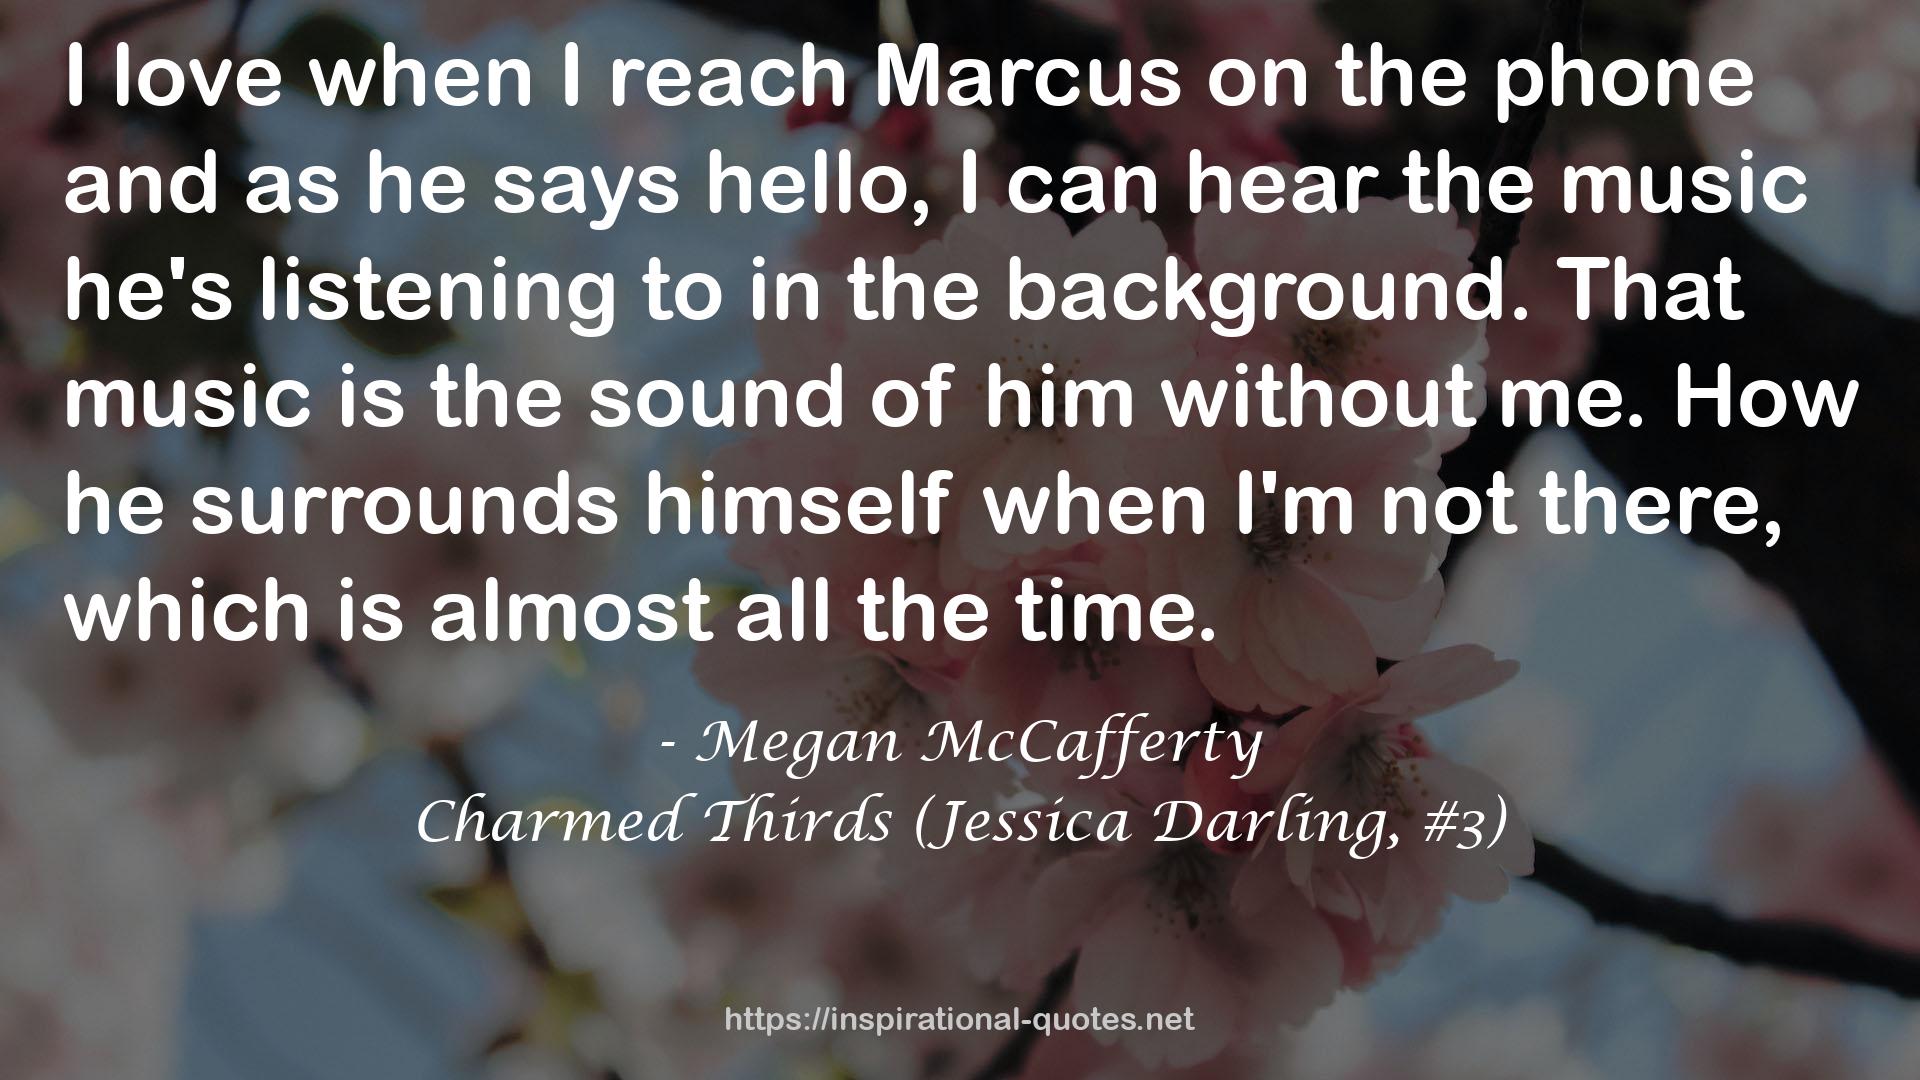 Charmed Thirds (Jessica Darling, #3) QUOTES